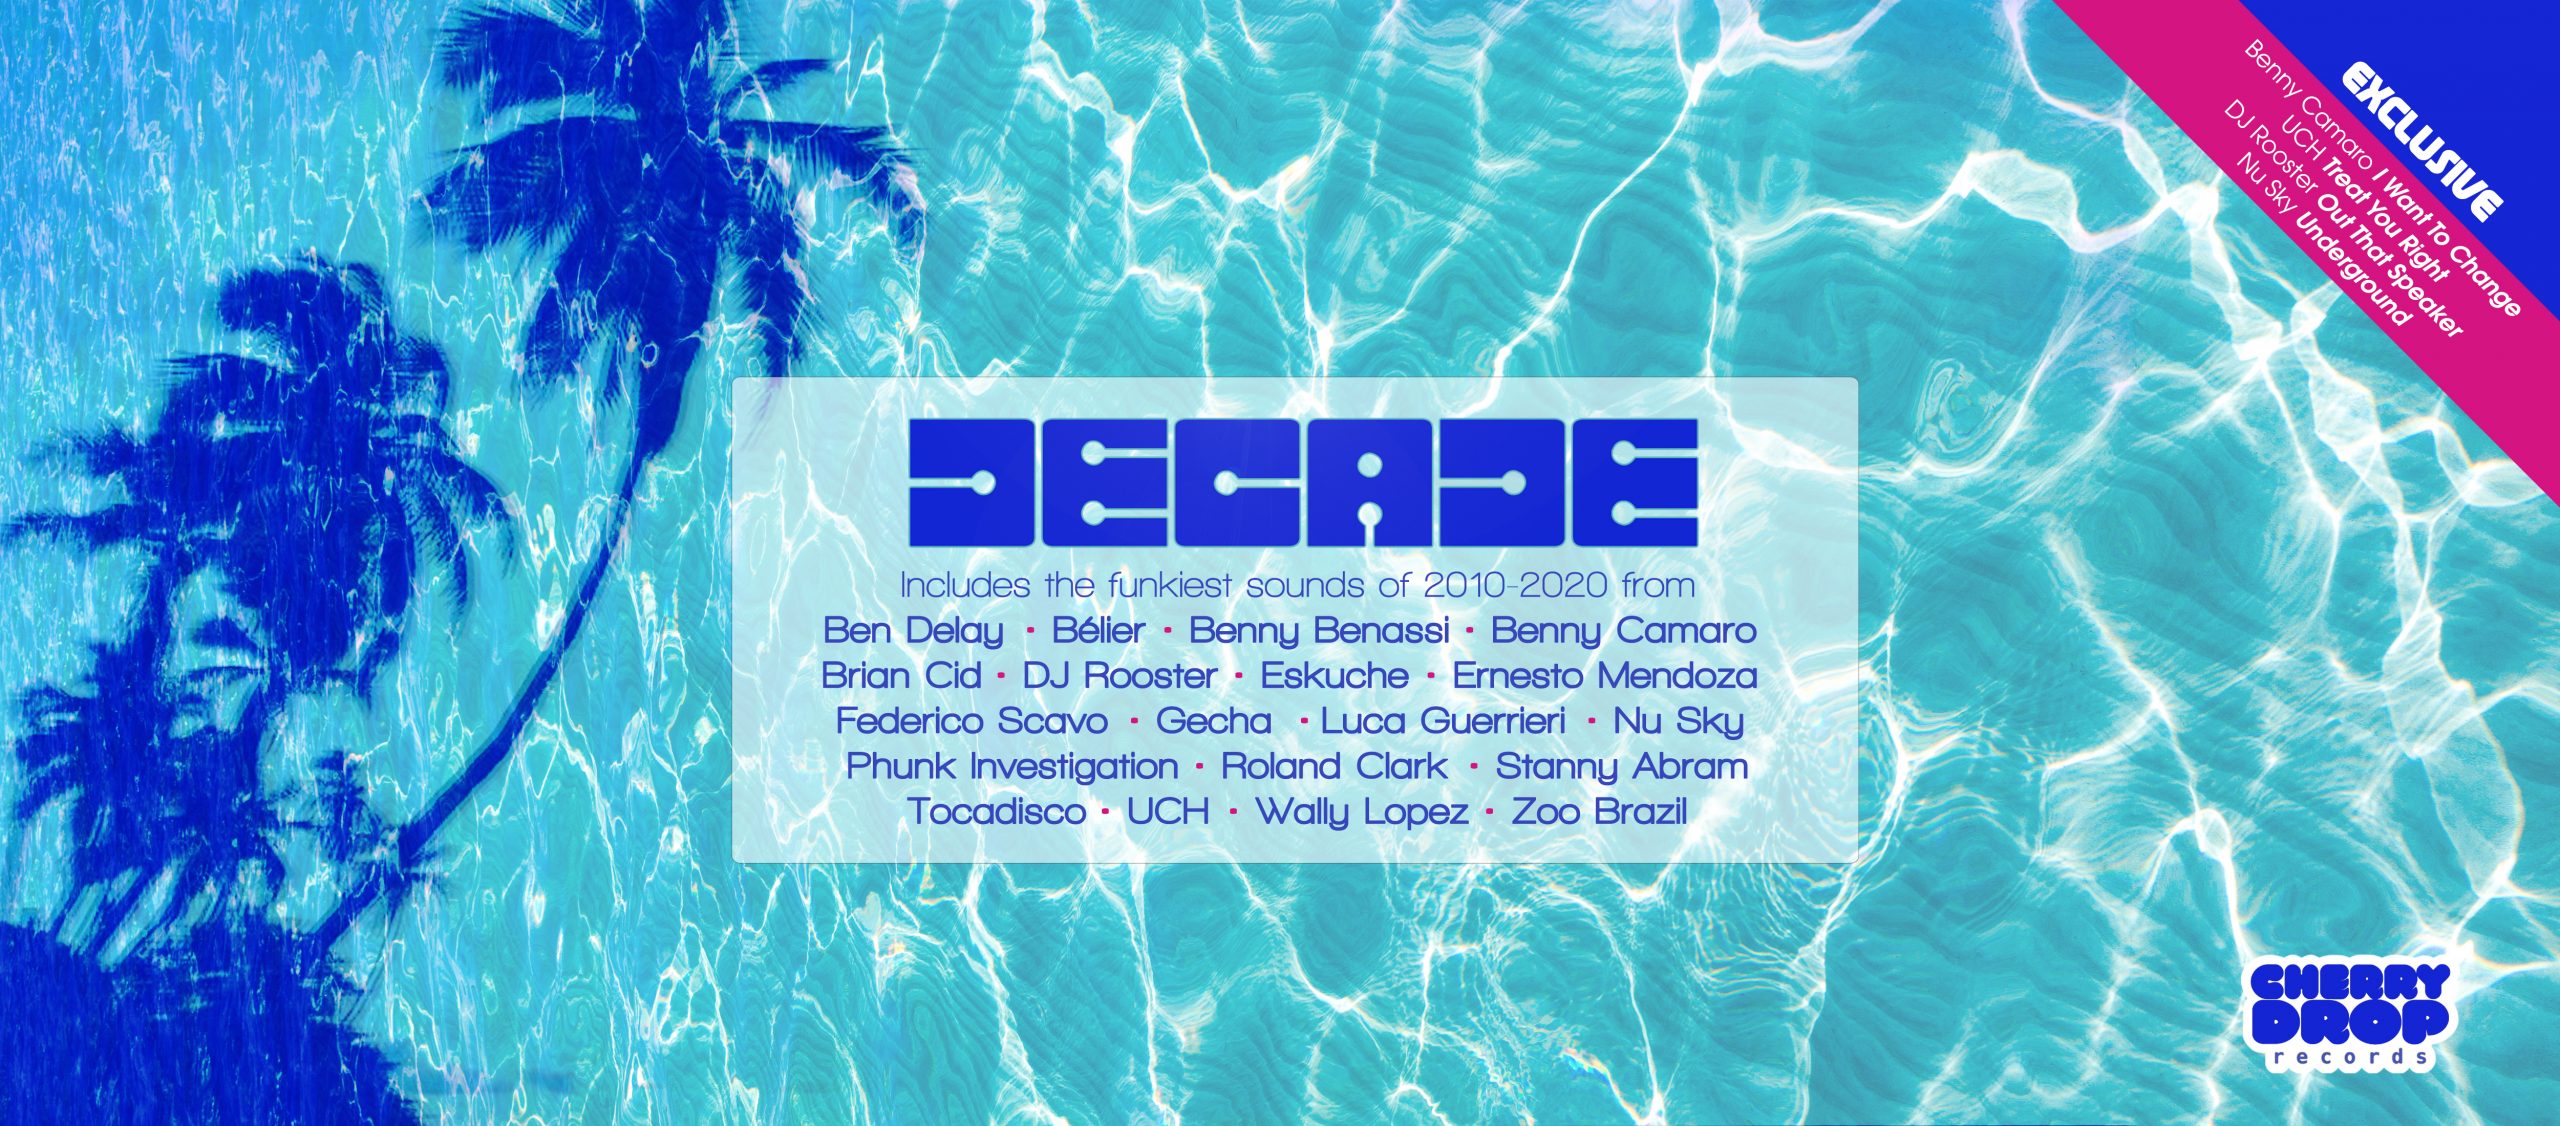 The compilation album ‘Decade’ will include exclusive new tracks from local NYC producer/DJs up and coming UCH and Nu Sky and house legend DJ Rooster.